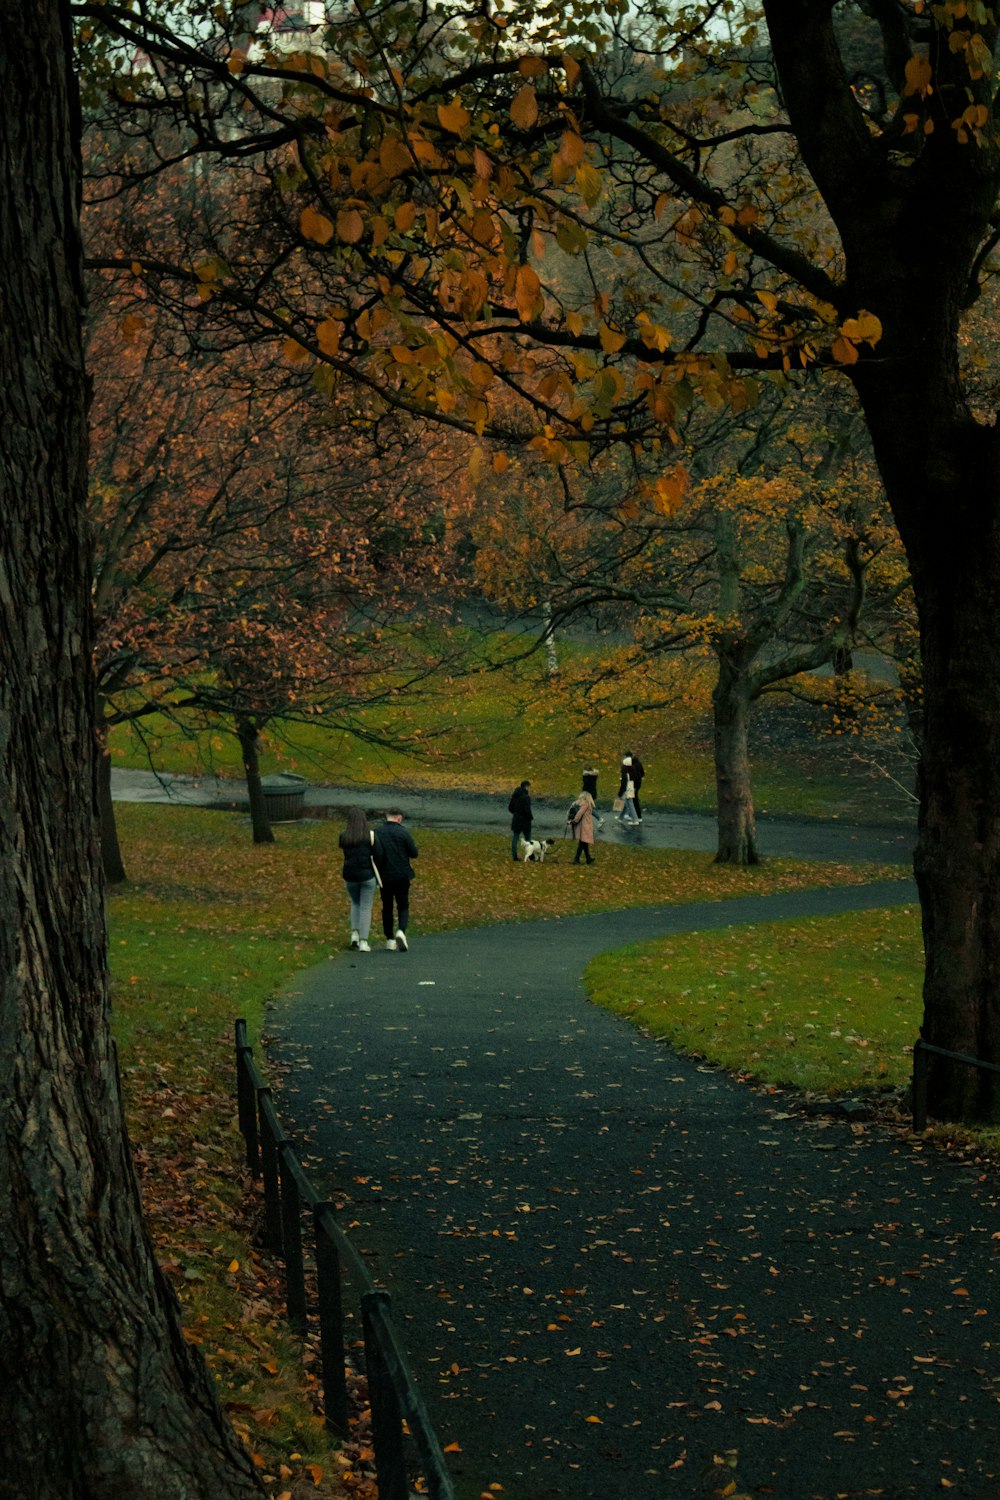 people walking on a path through trees